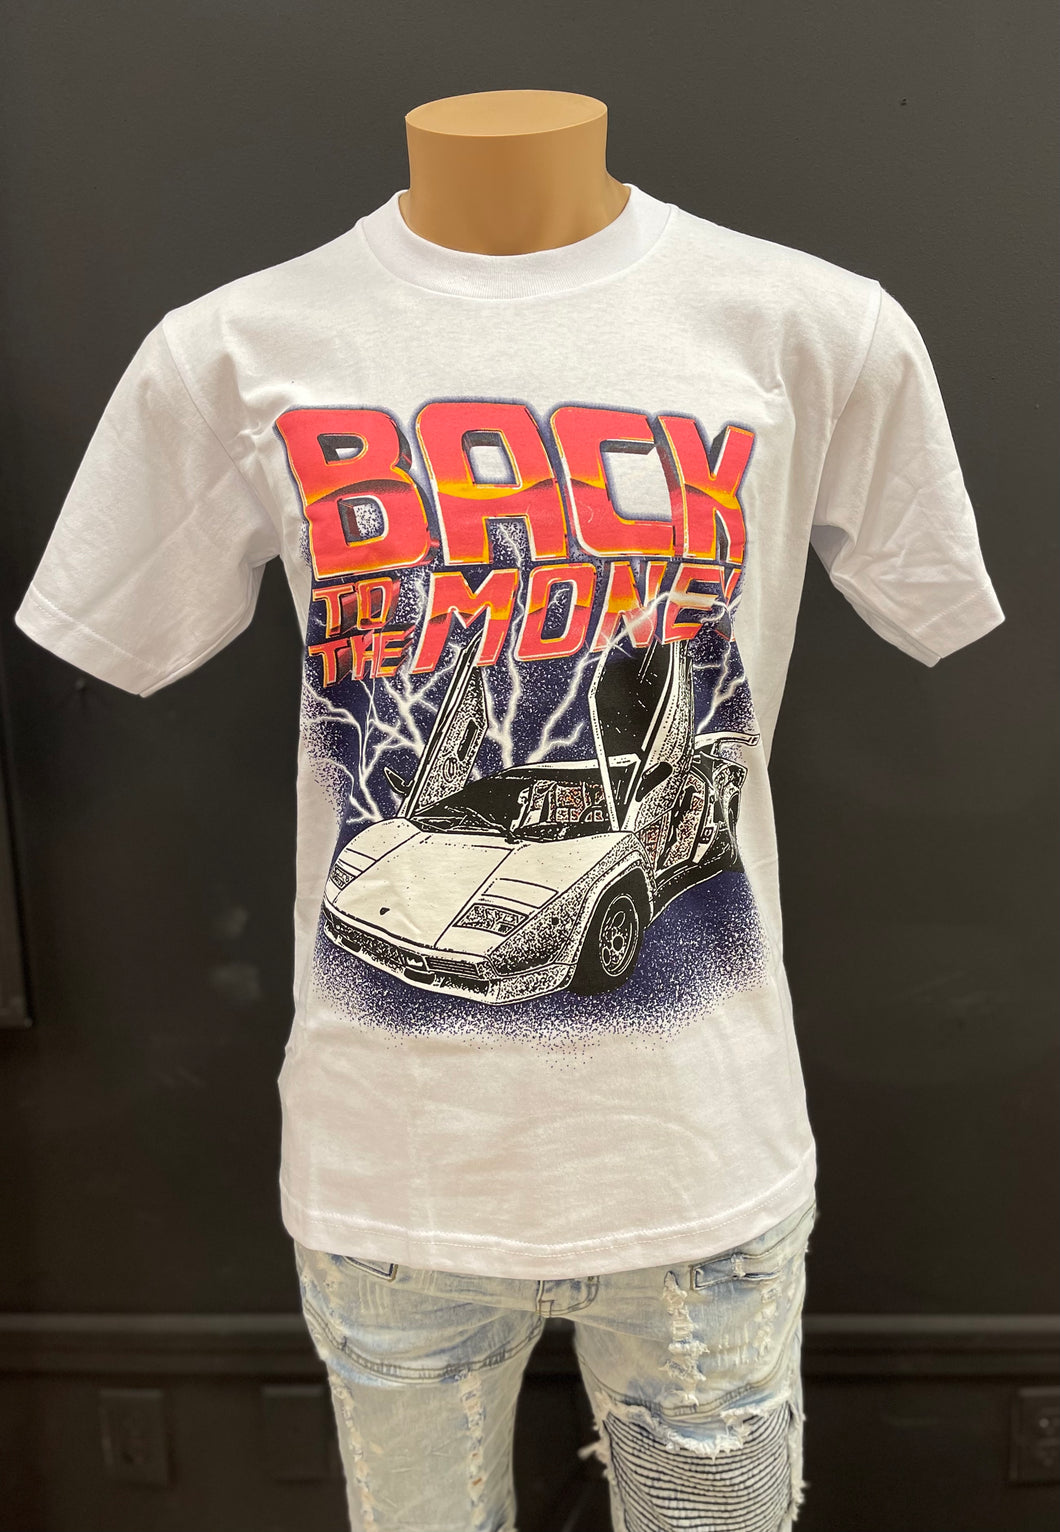 Back to the money shirt